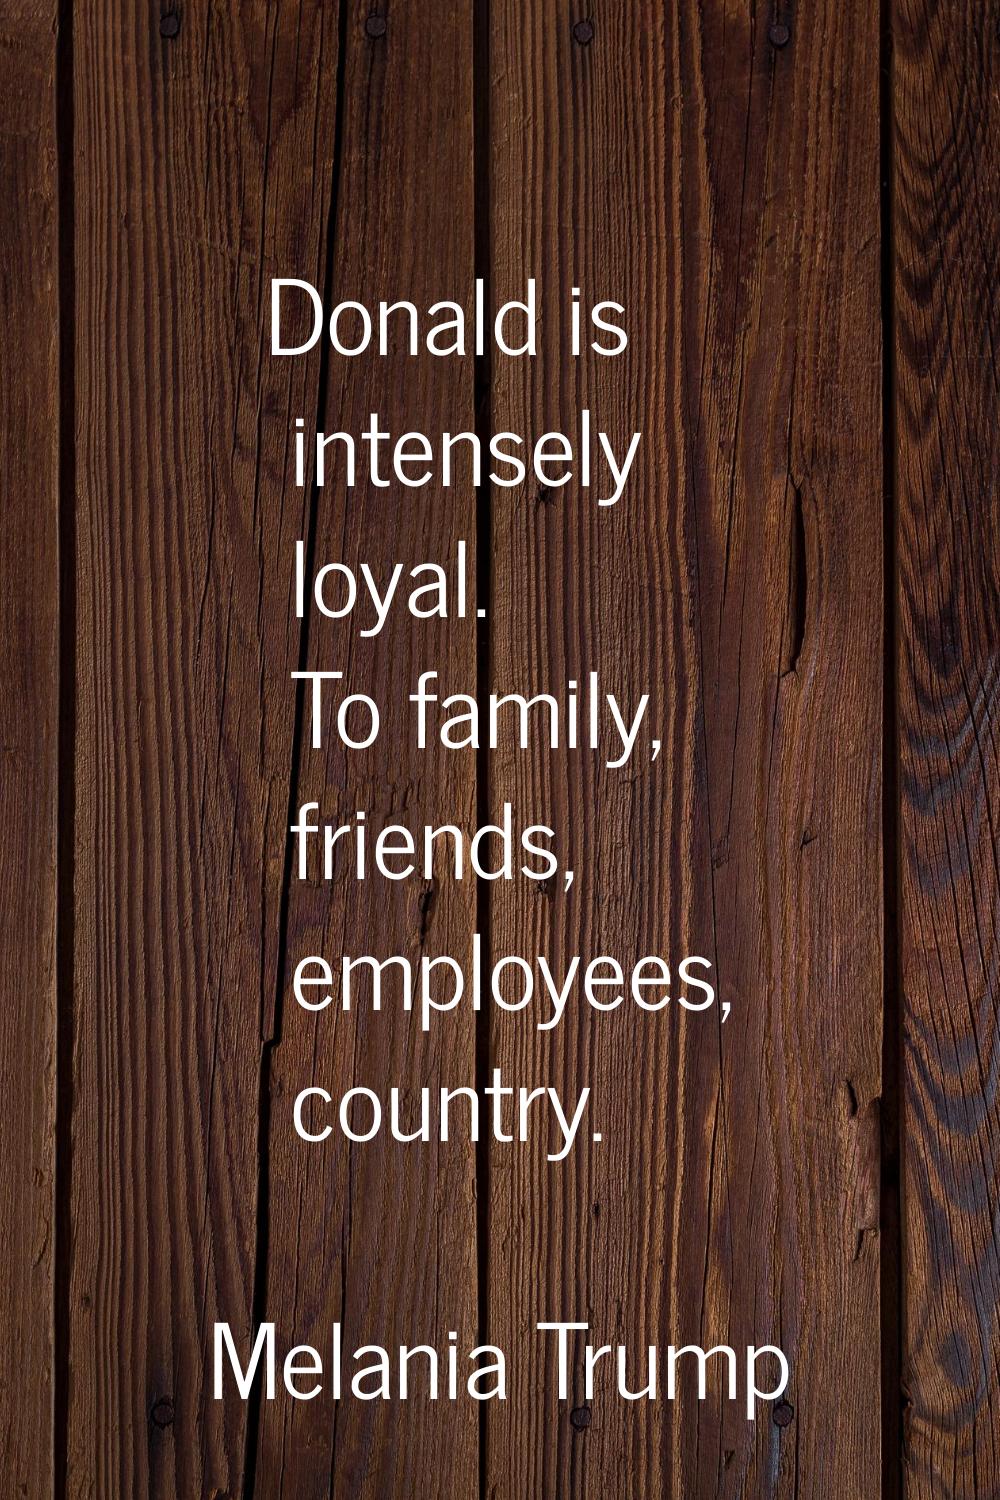 Donald is intensely loyal. To family, friends, employees, country.